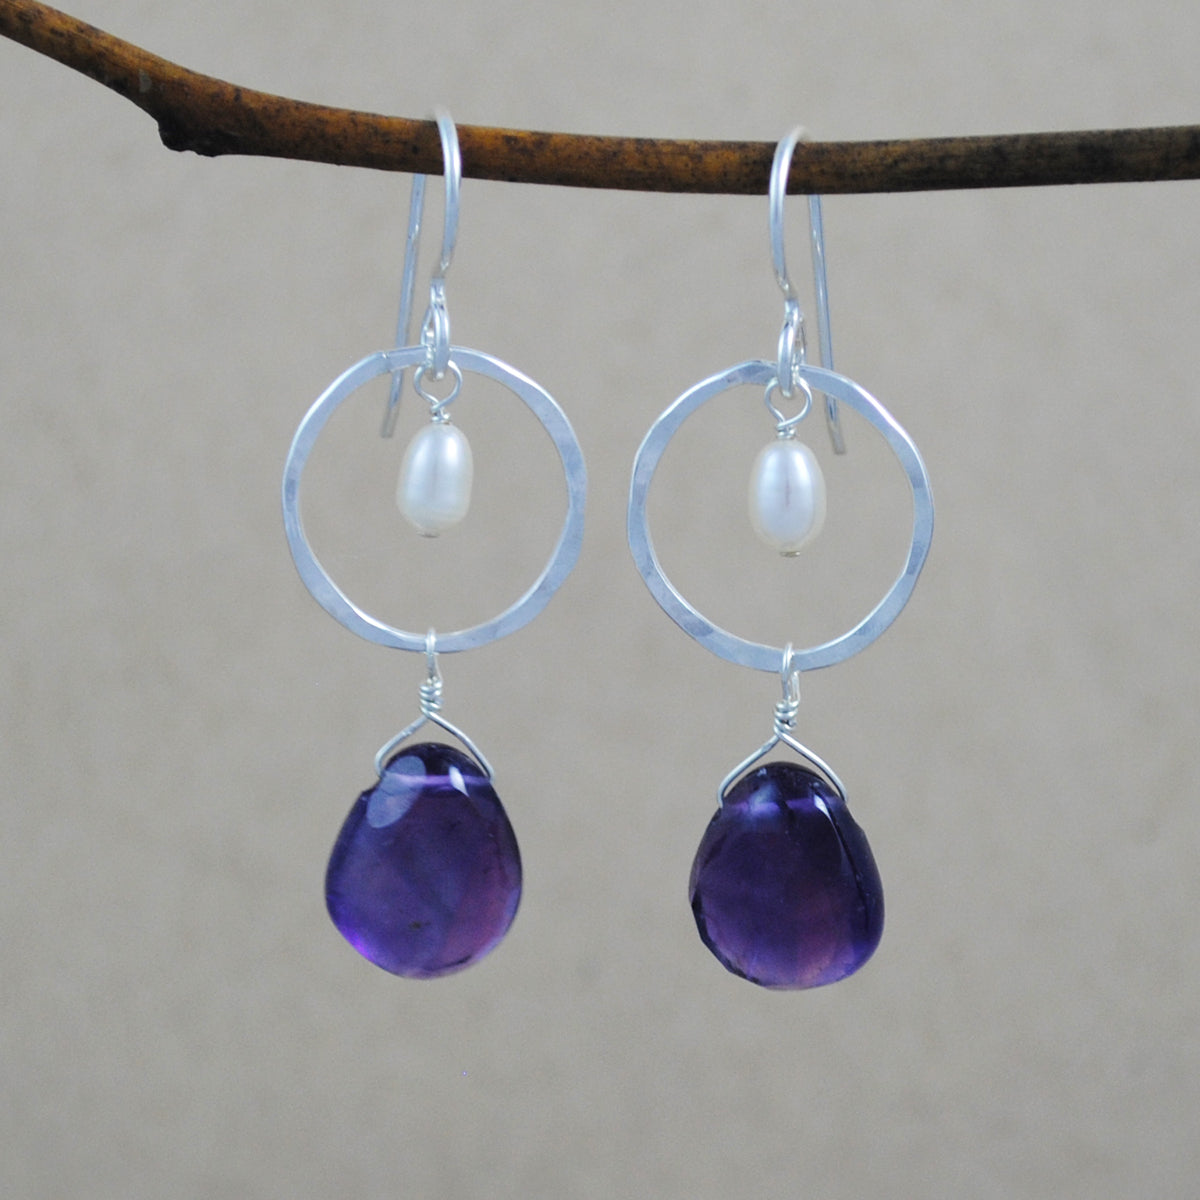 Circle with Stone and Pearl Earrings - sterling